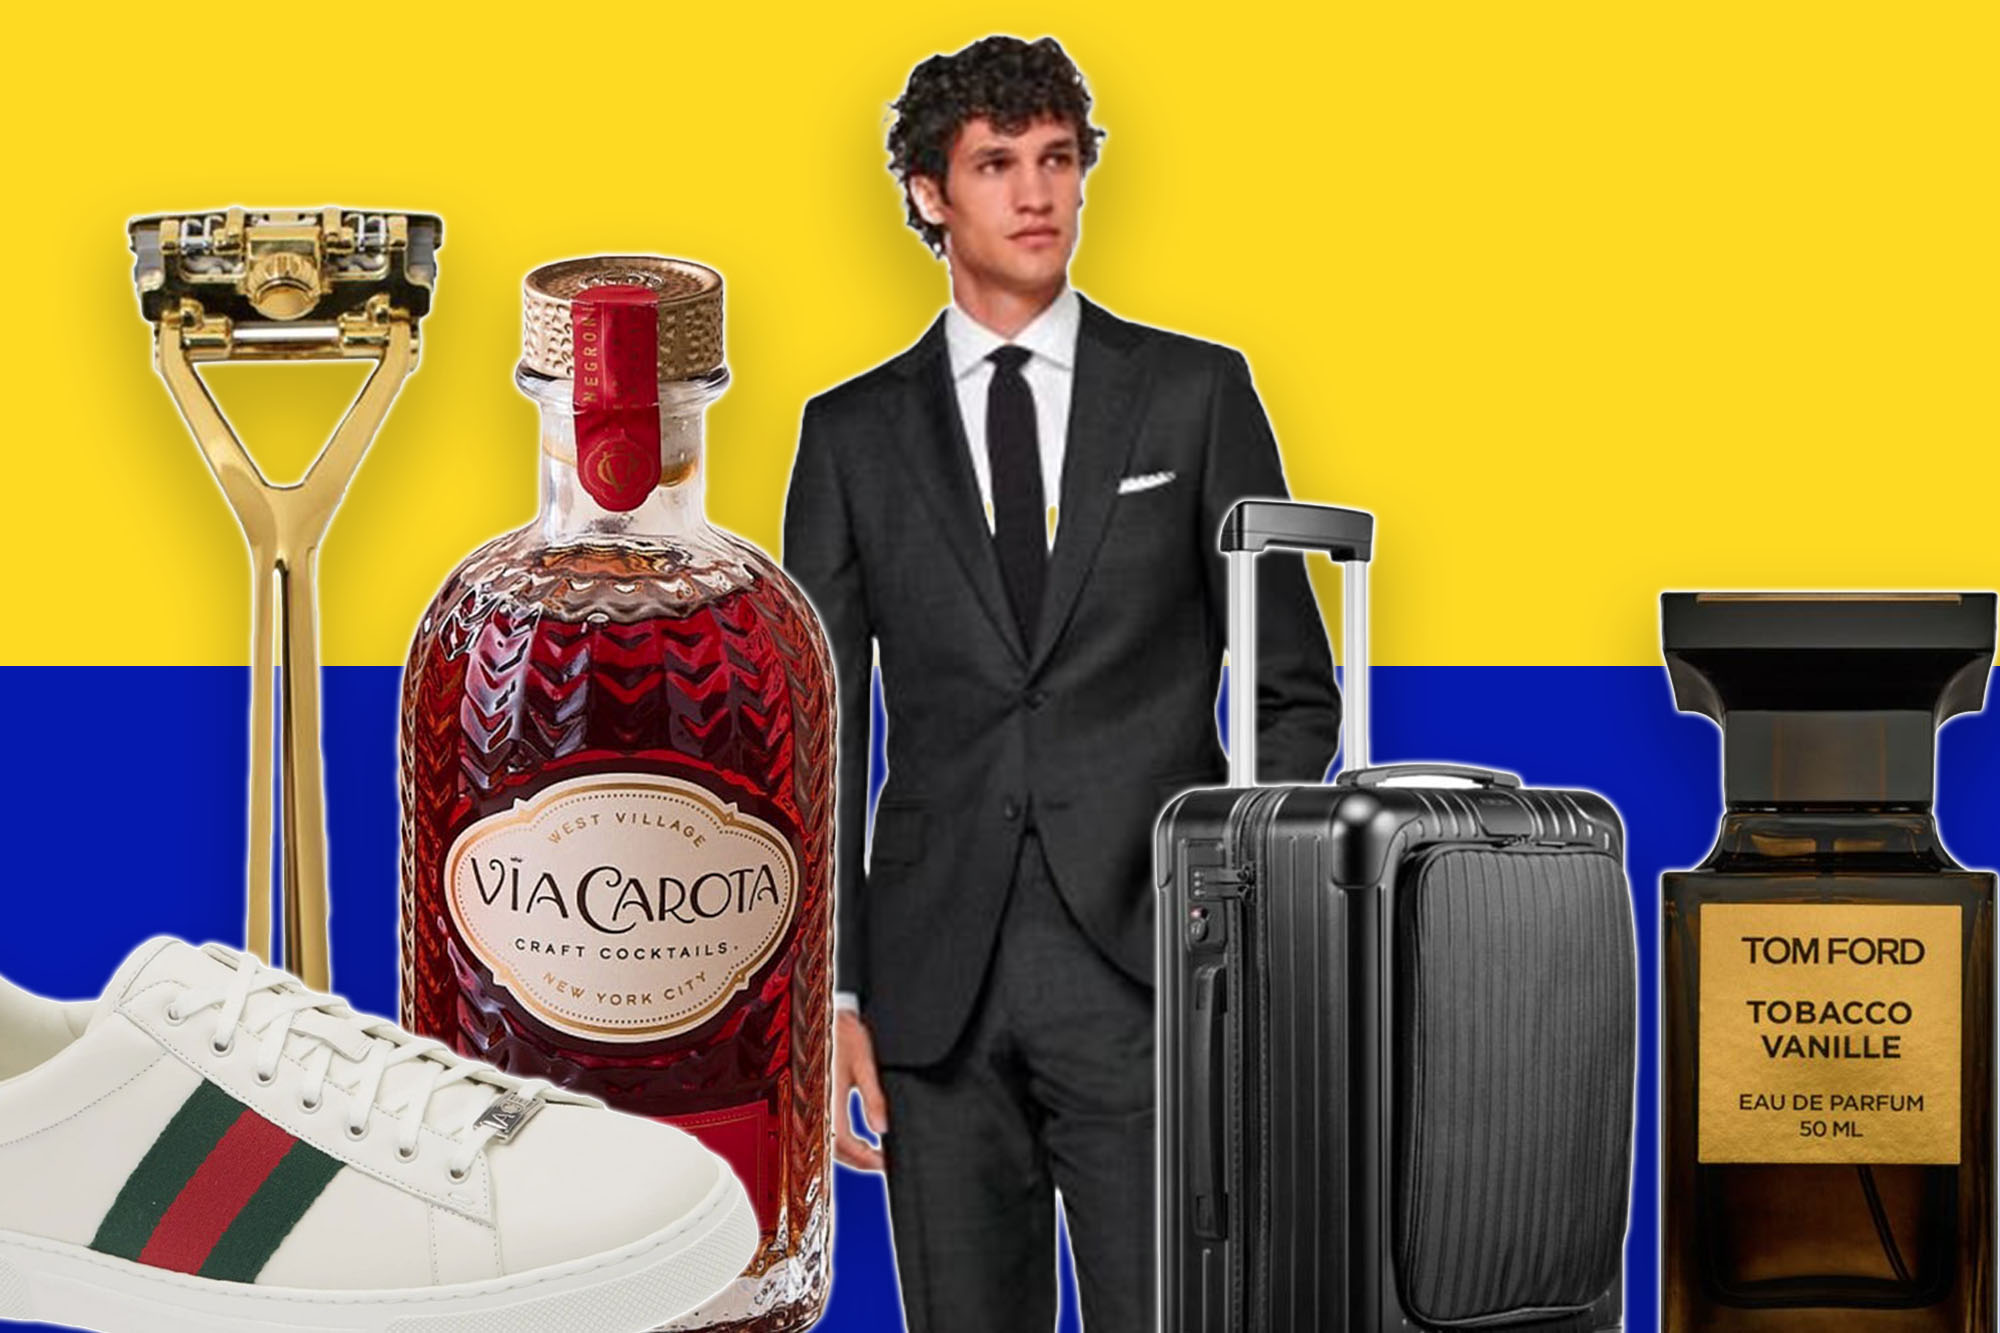 95 men's luxury gift ideas all dads will appreciate this Father's Day